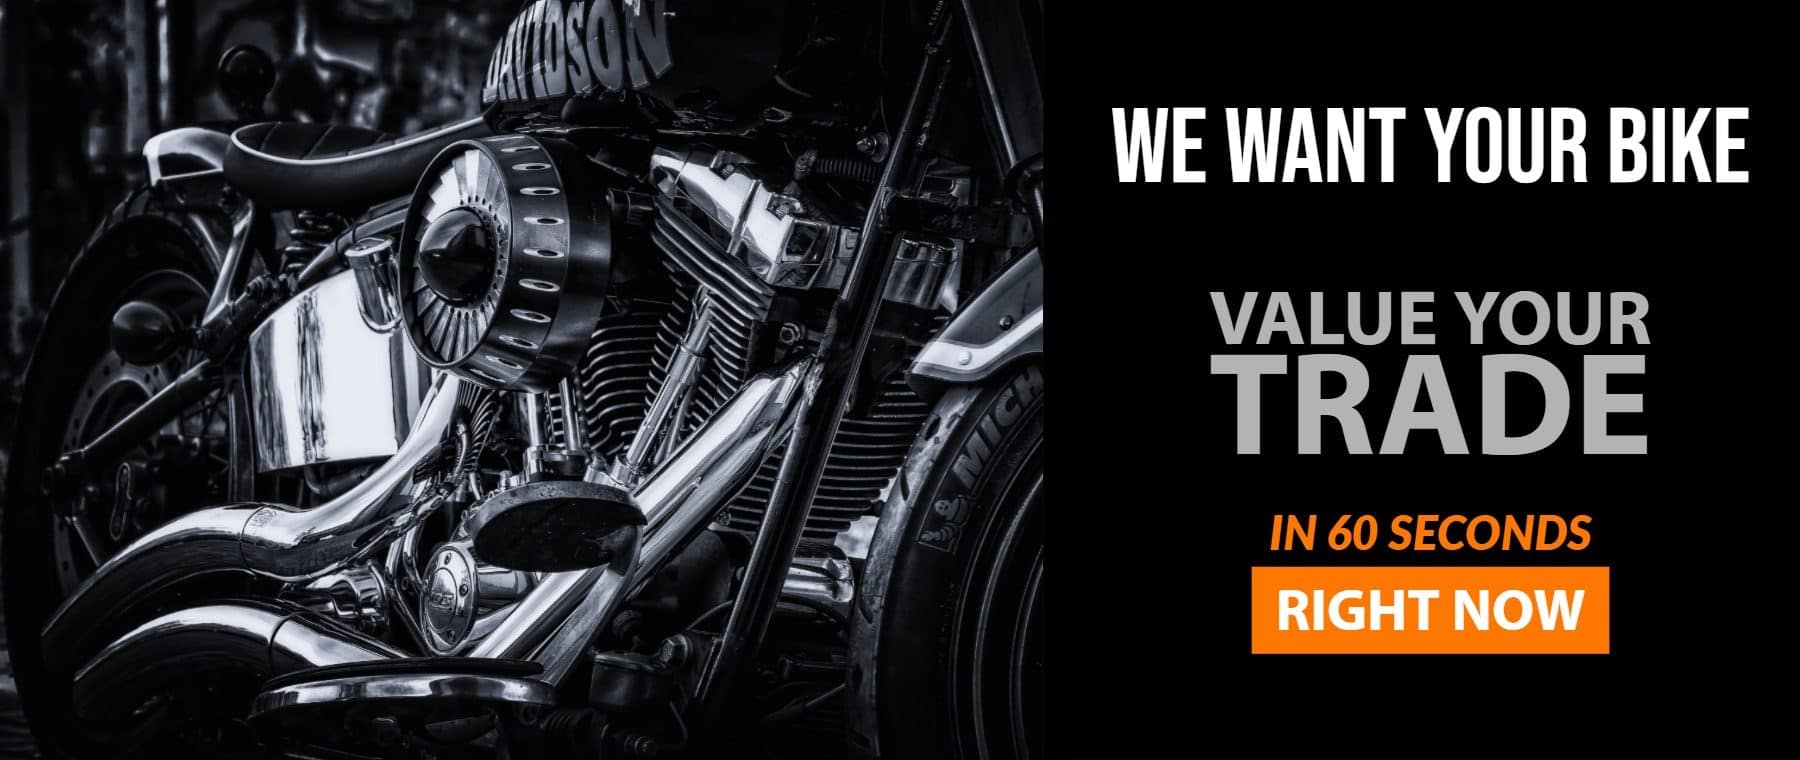 We want your bike. Value Your Trade in 60 Seconds!